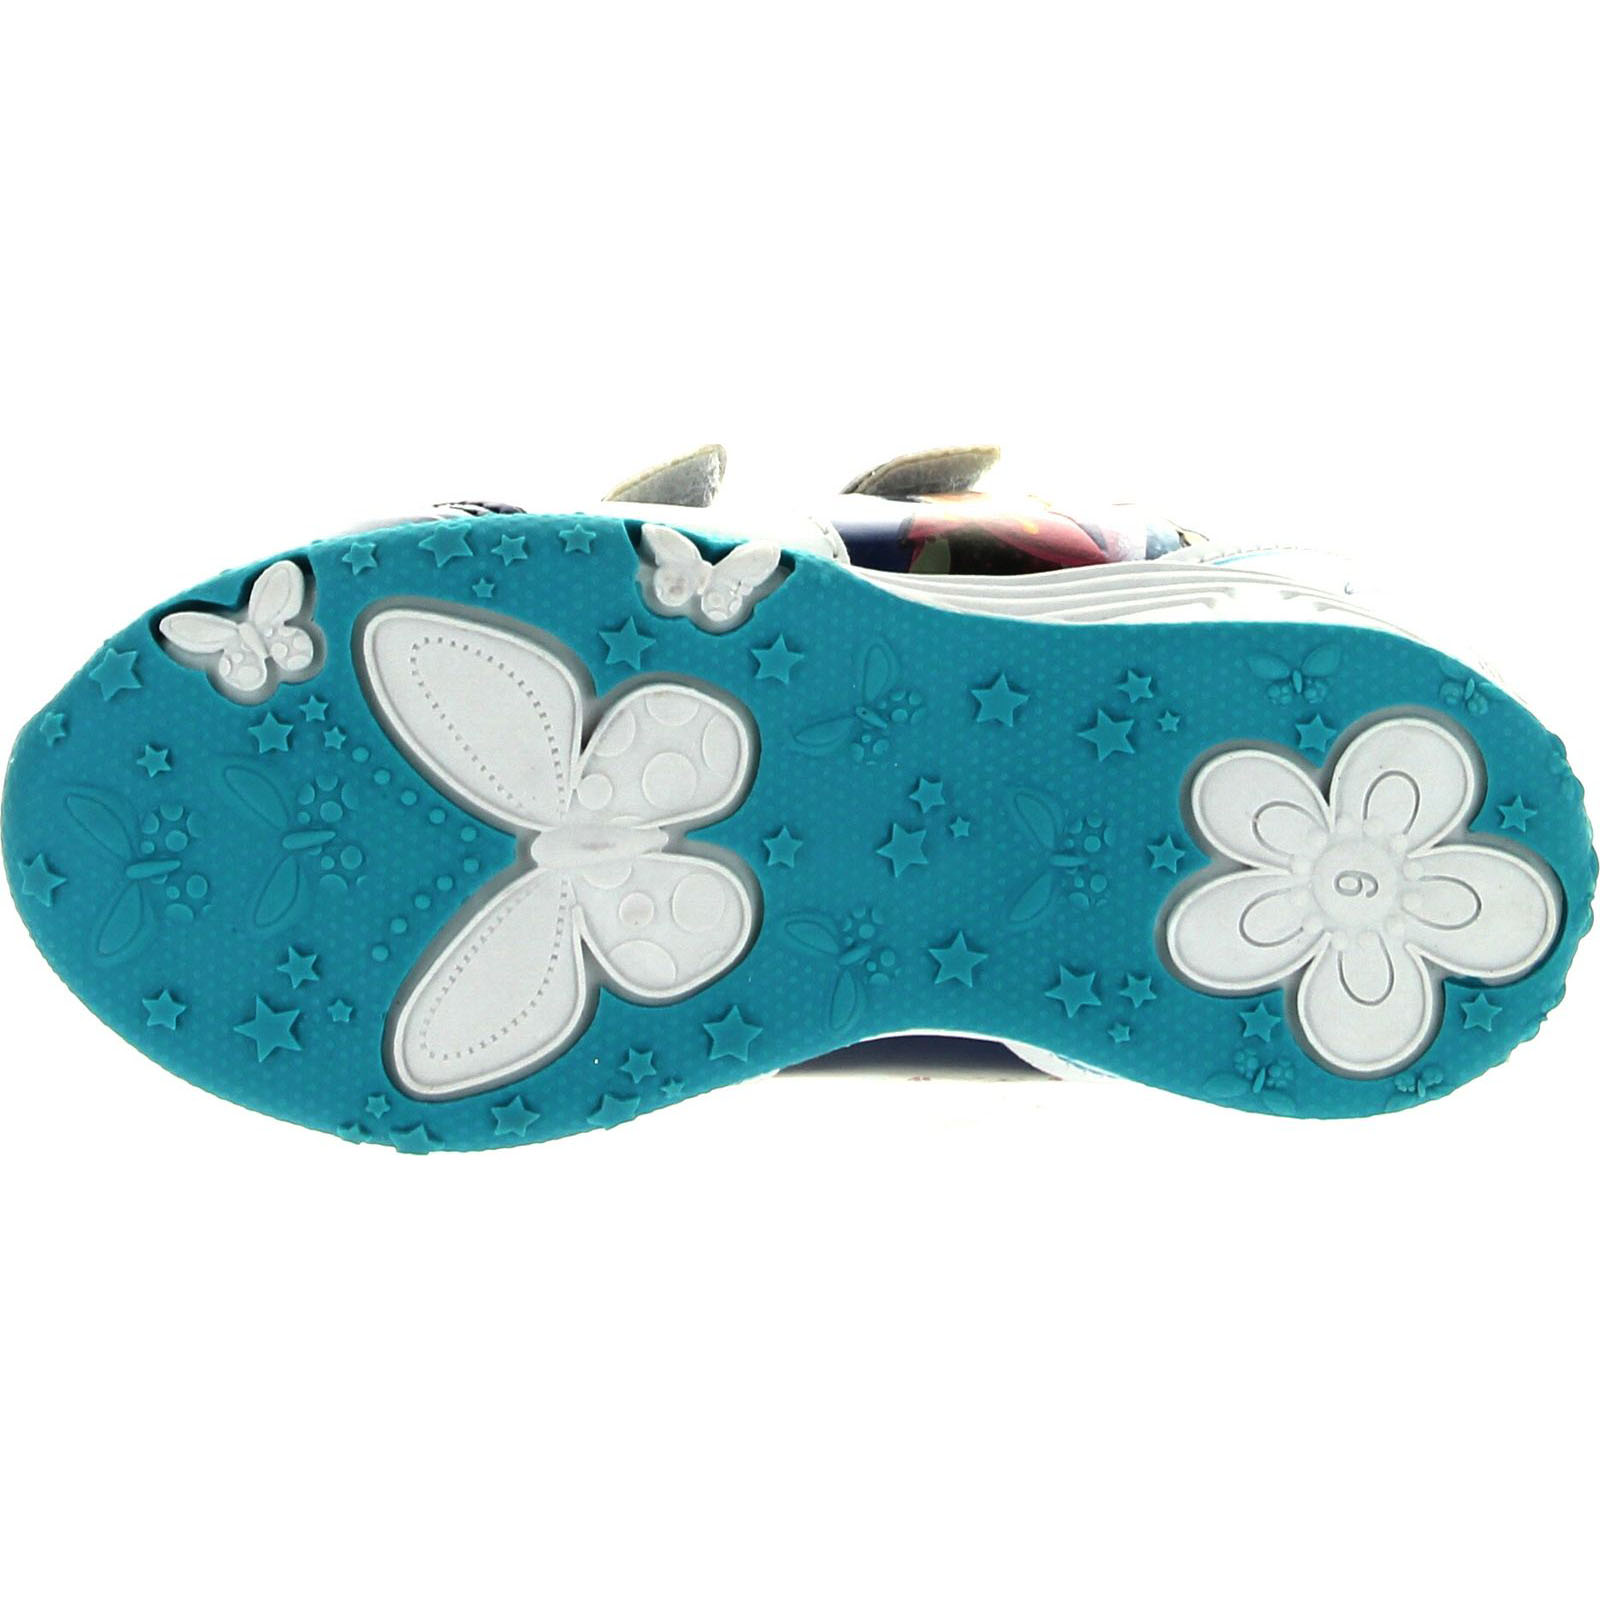 Disney Girls Frozen Princess Elsa and Anna Fashion Sneakers - image 4 of 4